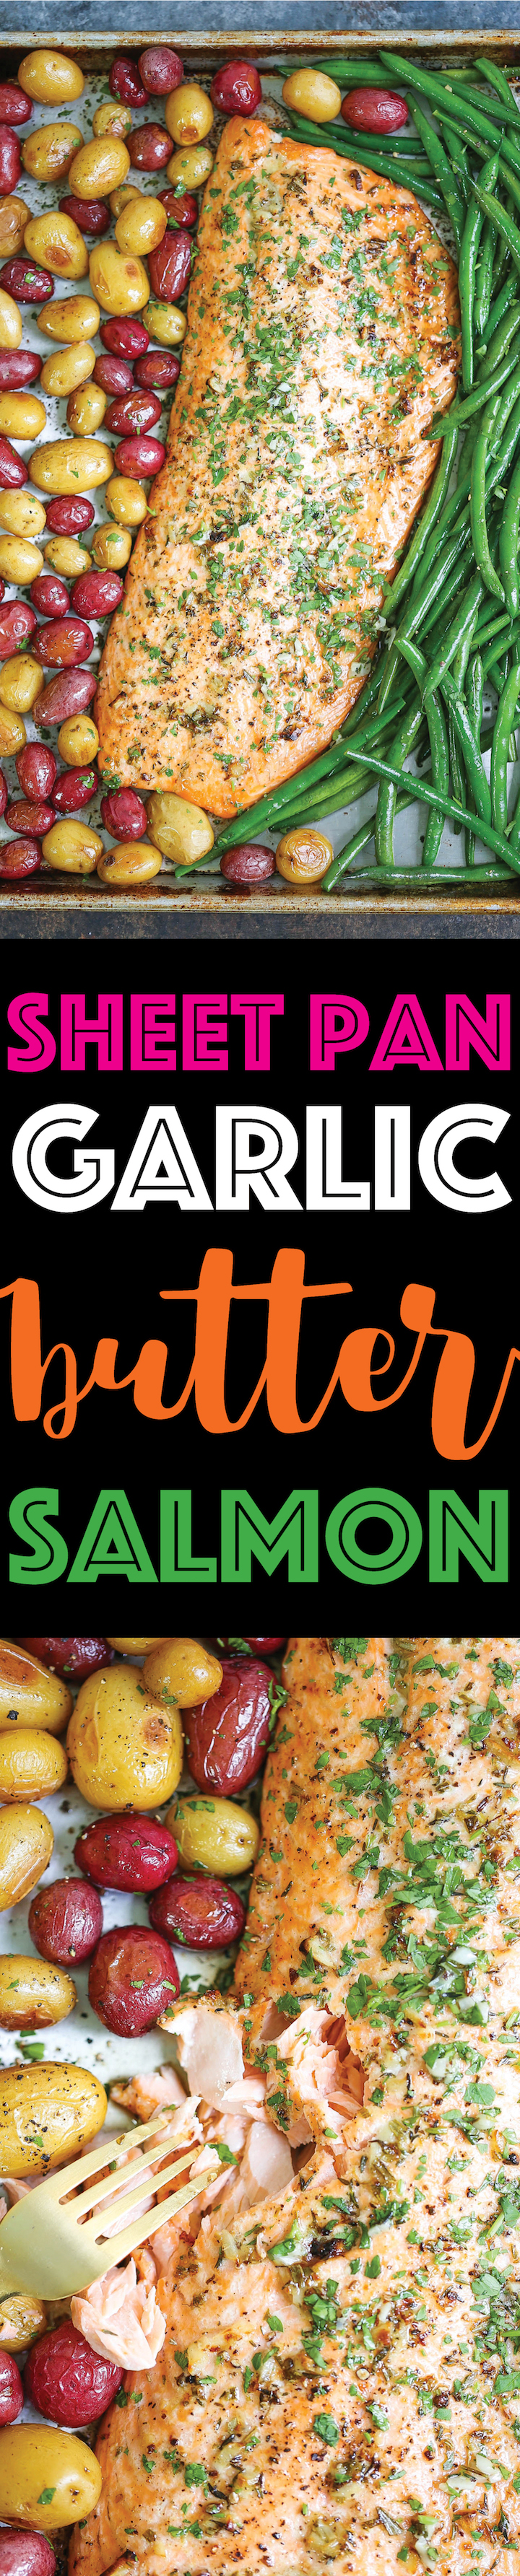 Sheet Pan Garlic Butter Salmon - A complete sheet pan supper with ONE PAN to clean! With roasted potatoes and green beans with the BEST garlic butter sauce!